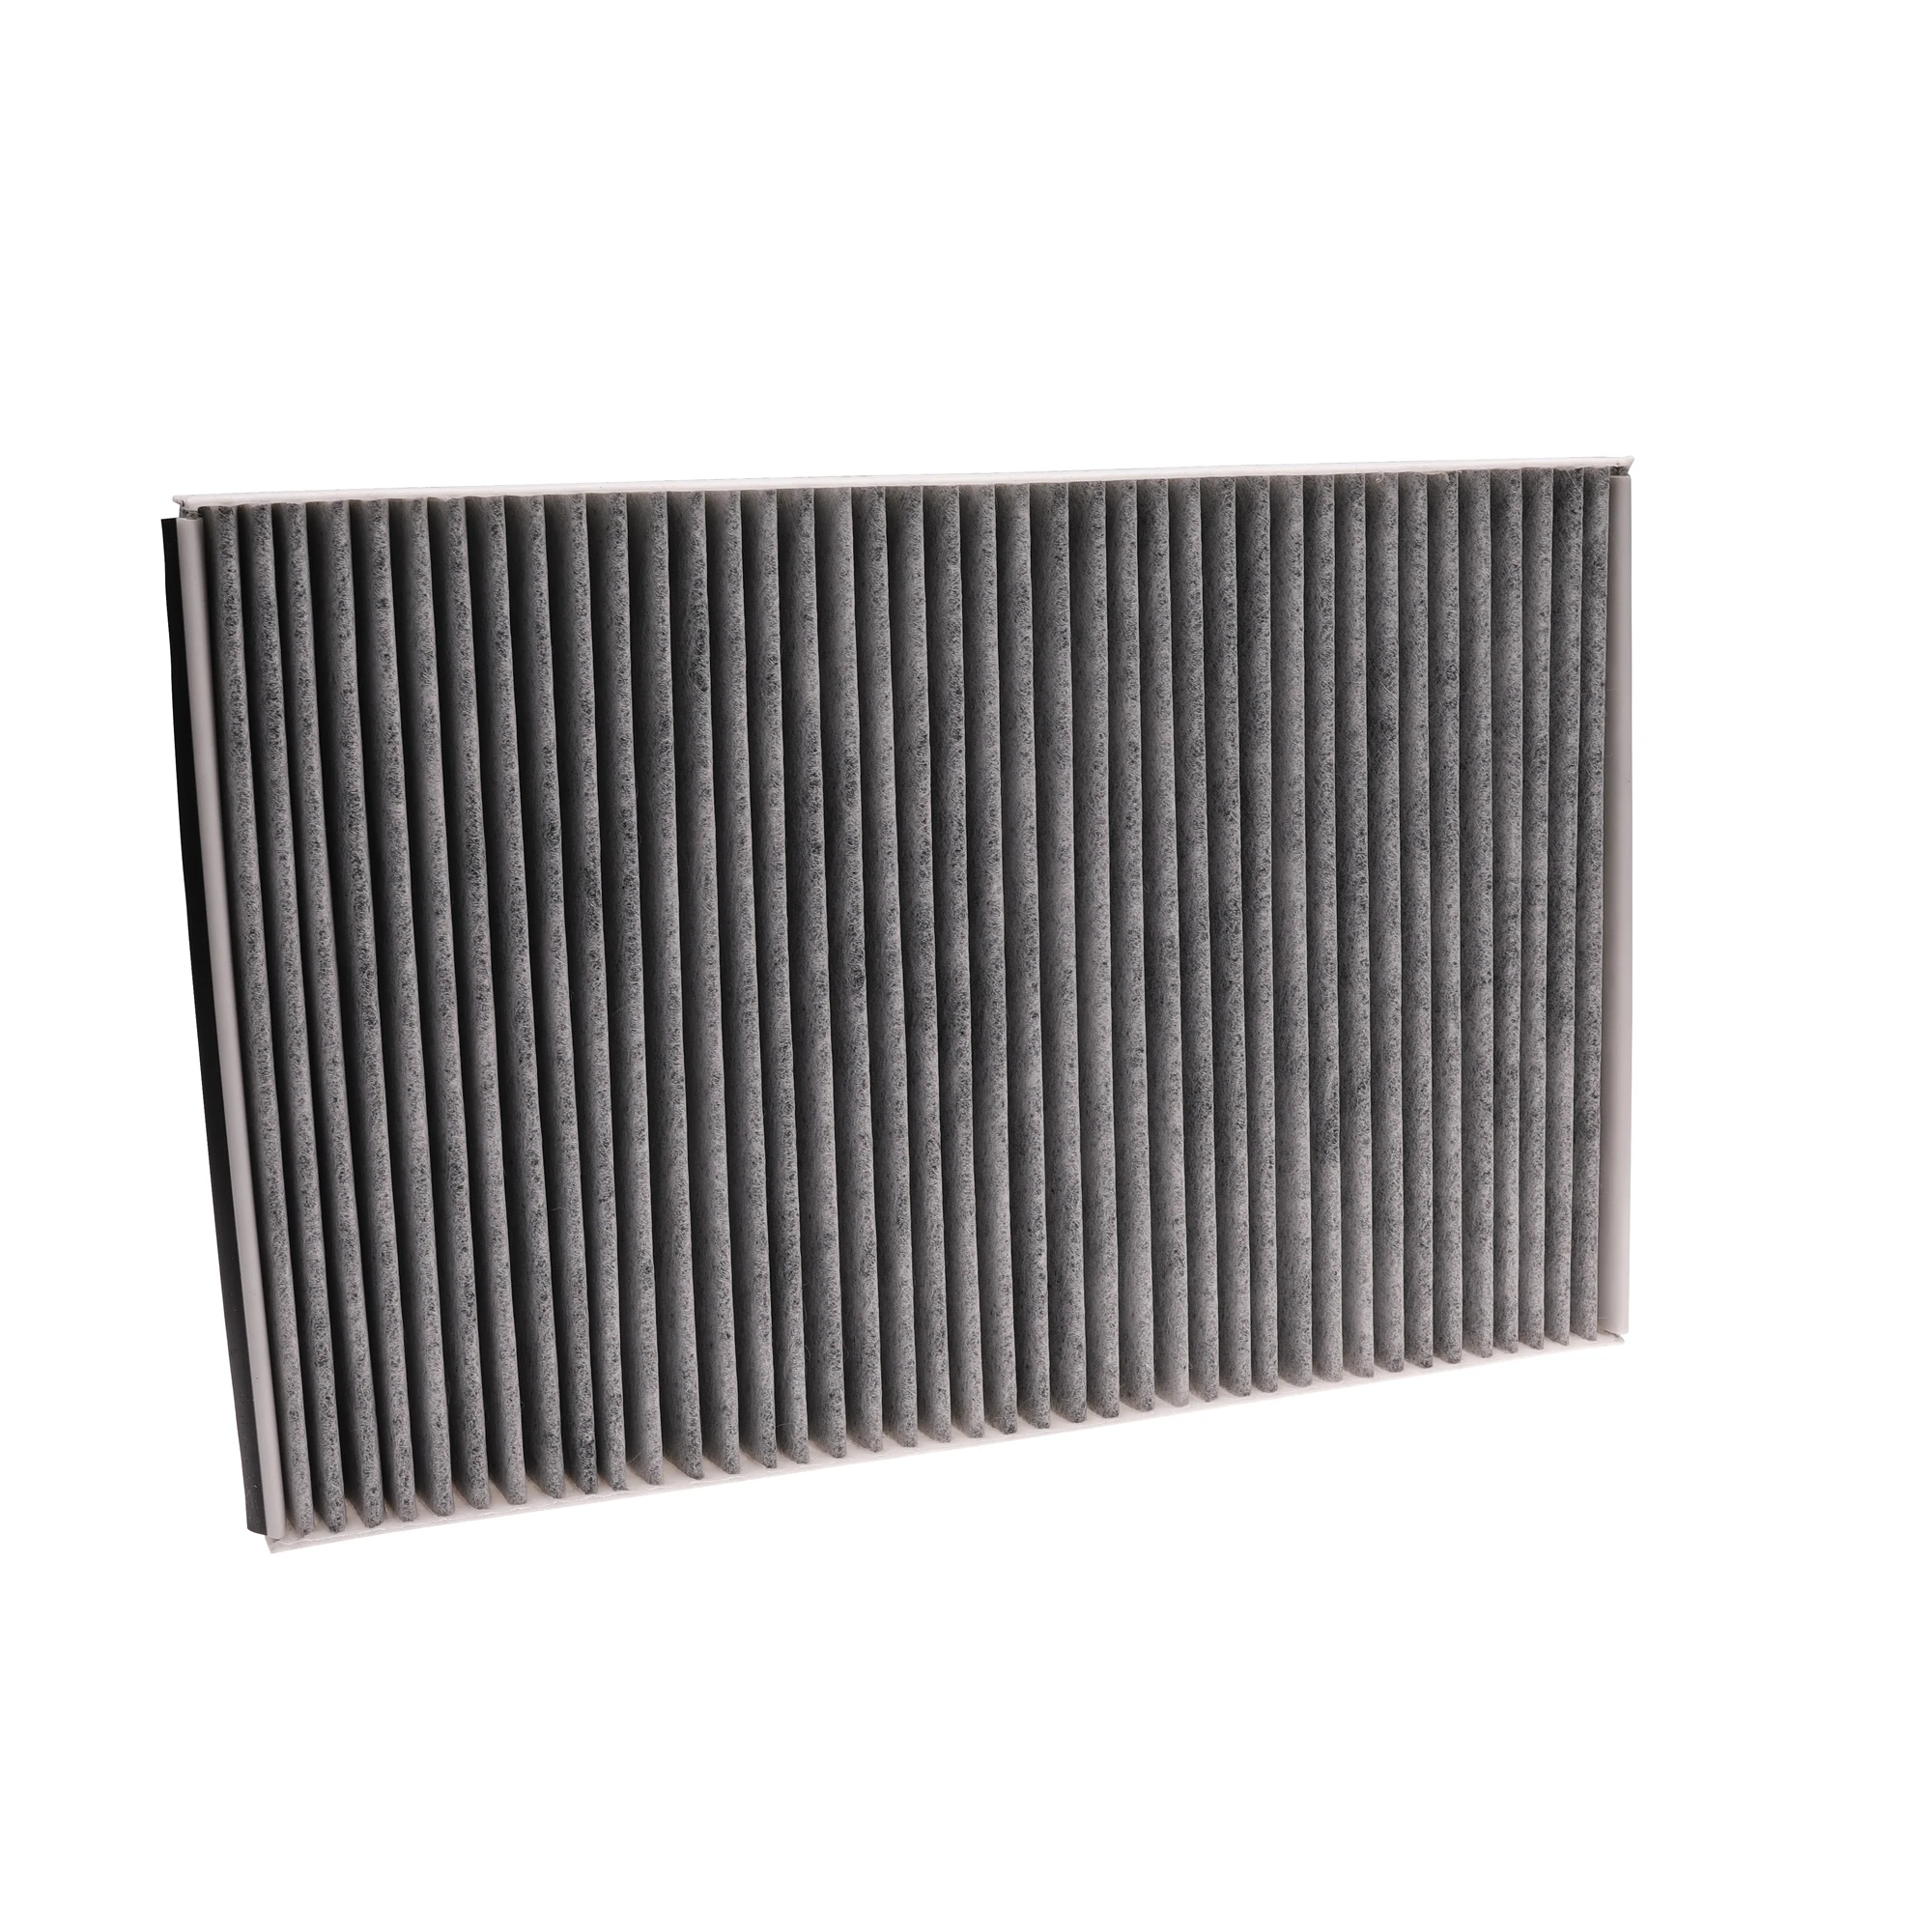 

LAK 307 Cabin Air Filter Fit for Mercedes Benz Sprinter 3-t 3,5-t 5-t 4,6-t Bus Box Platform/Chassis(906) VW Crafter 2006-2019